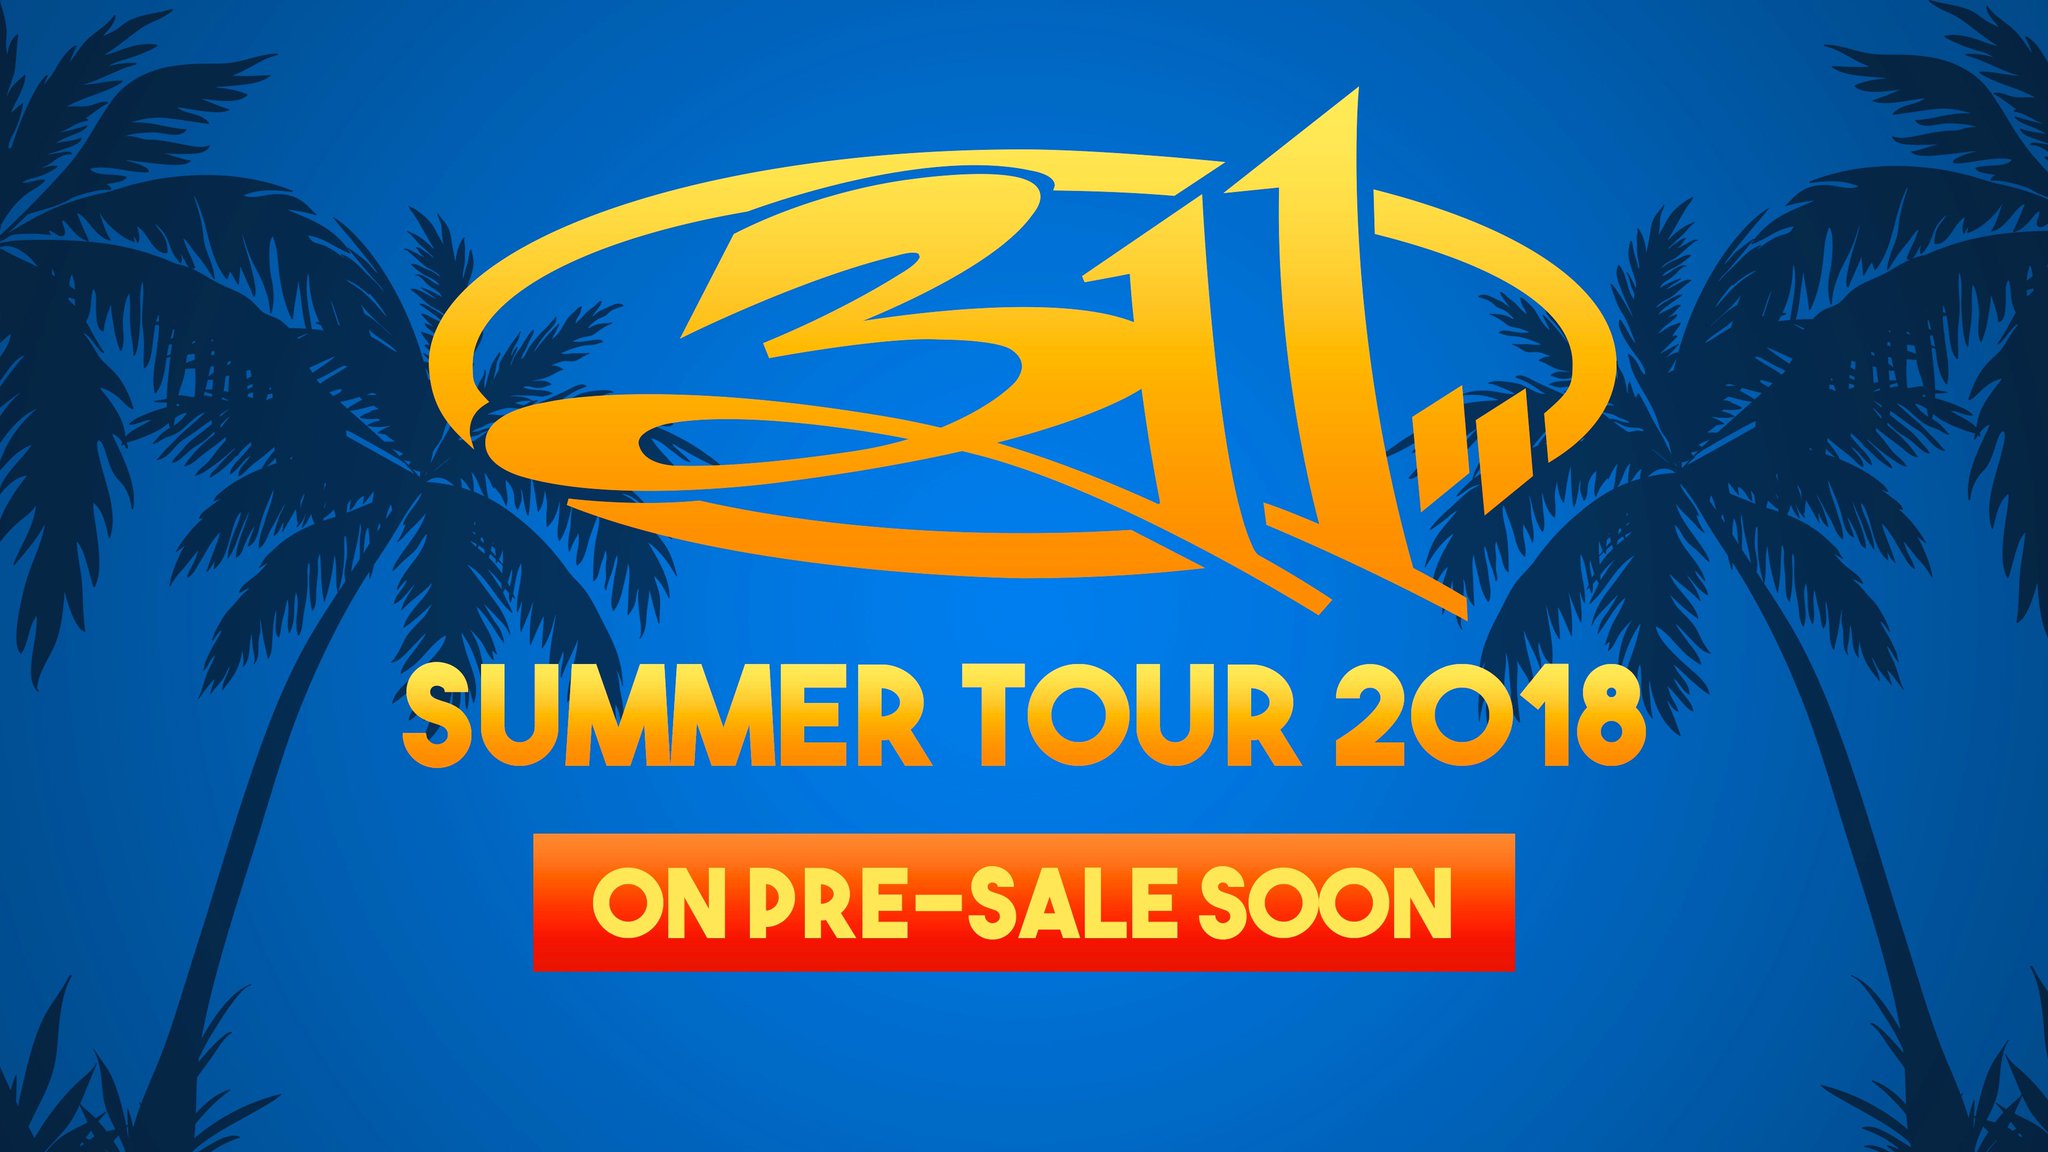 311 on Twitter "311 Summer Tour news coming! PreSale soon in early